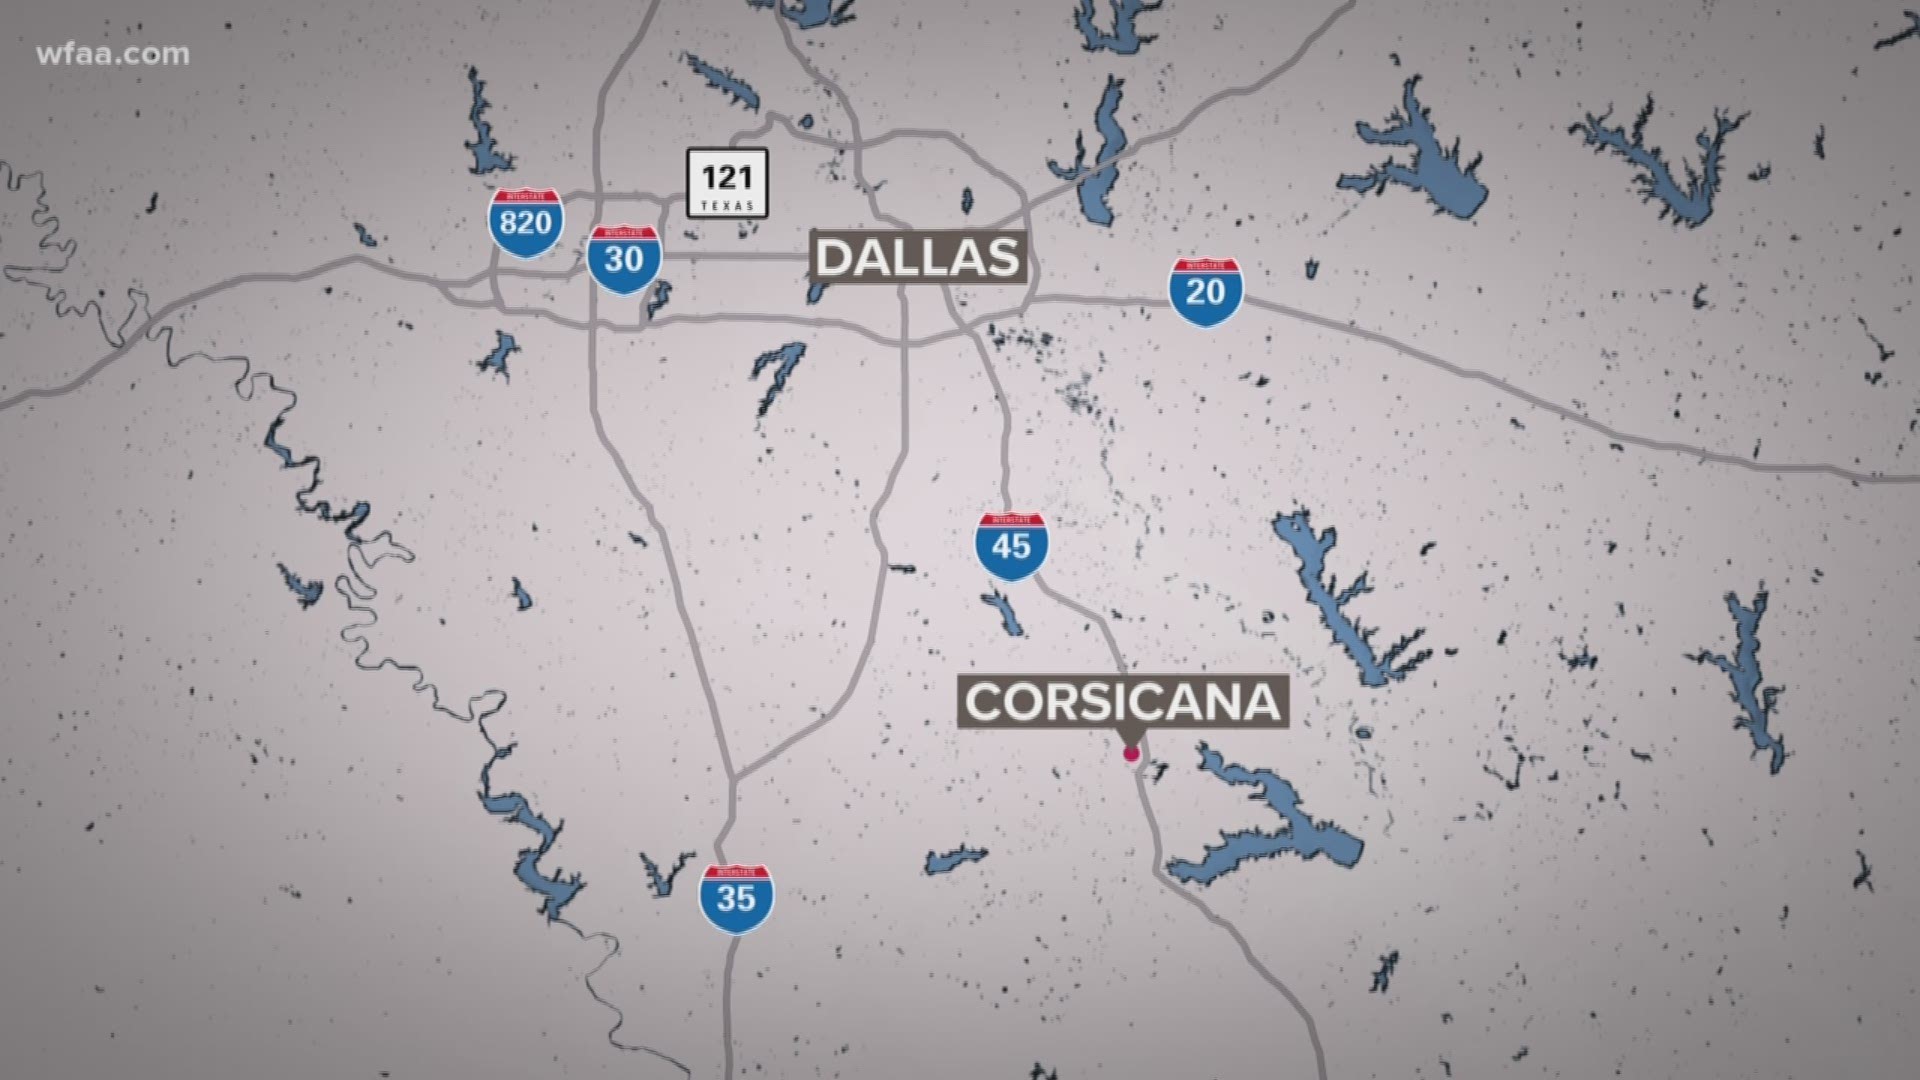 Corsicana police reveal names of suspect and women killed in Friday night double murder-suicide